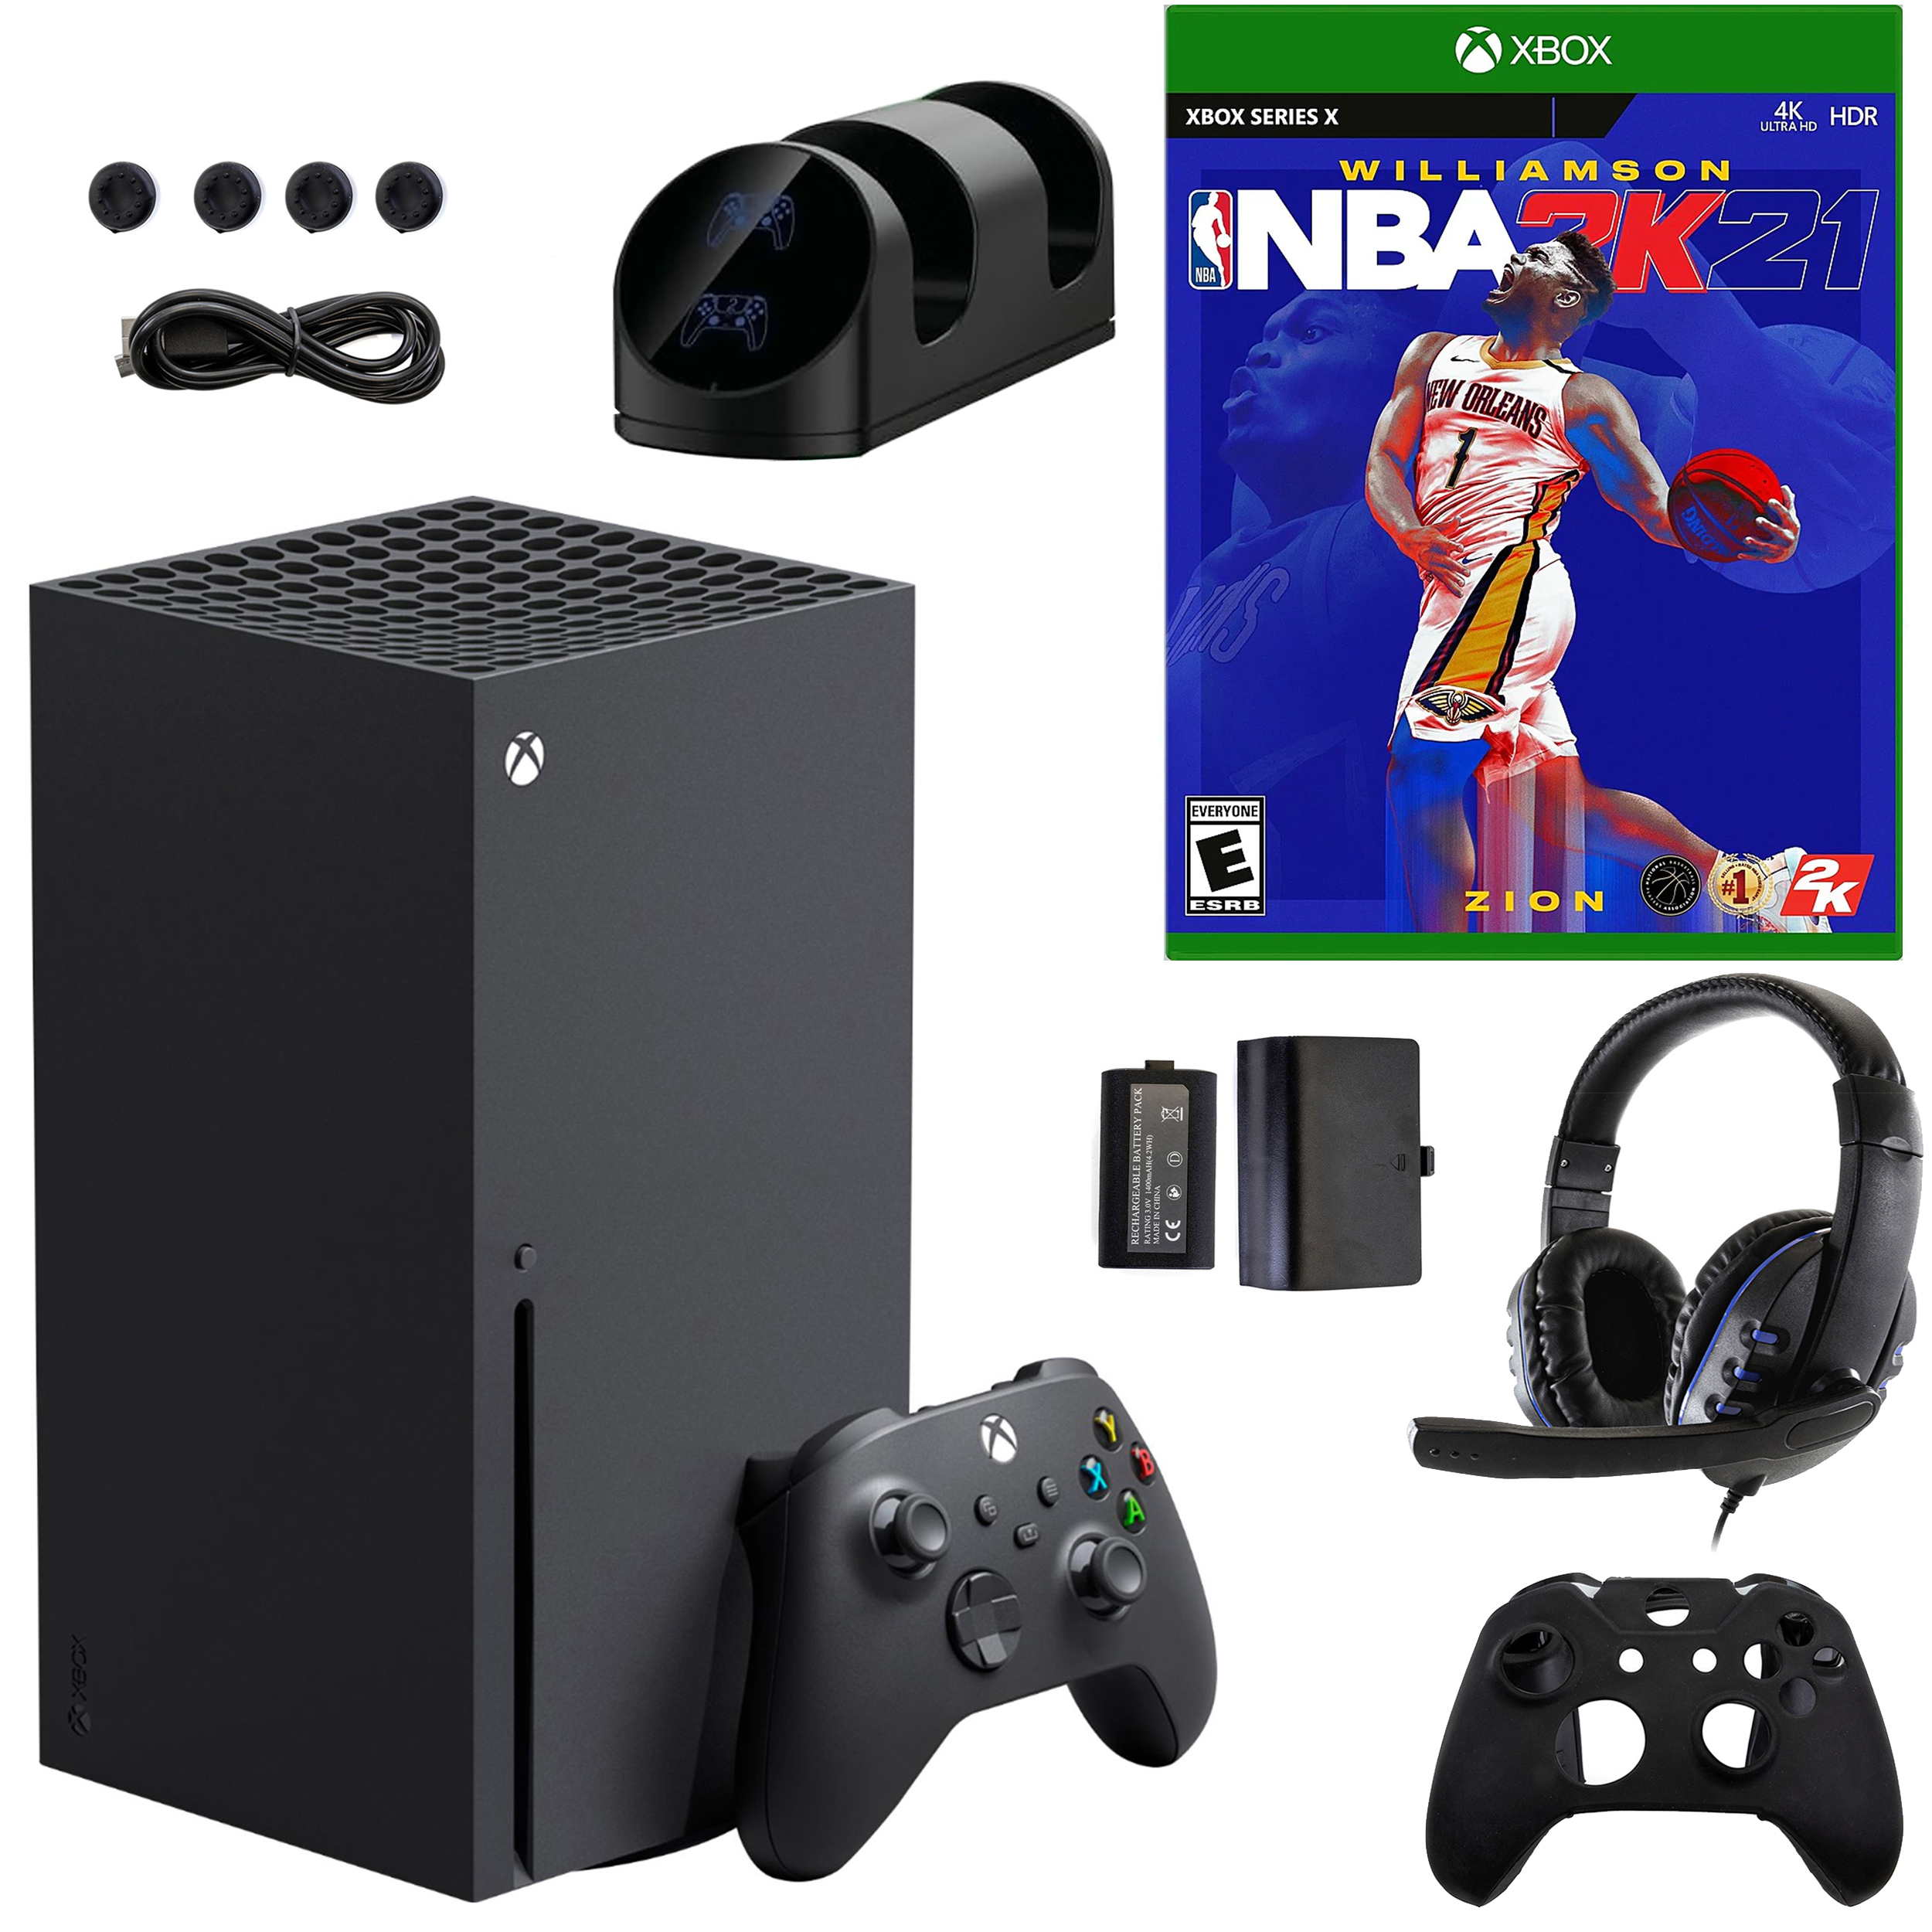 Microsoft Xbox Series X Console with NBA 2K21 Game and Accessories